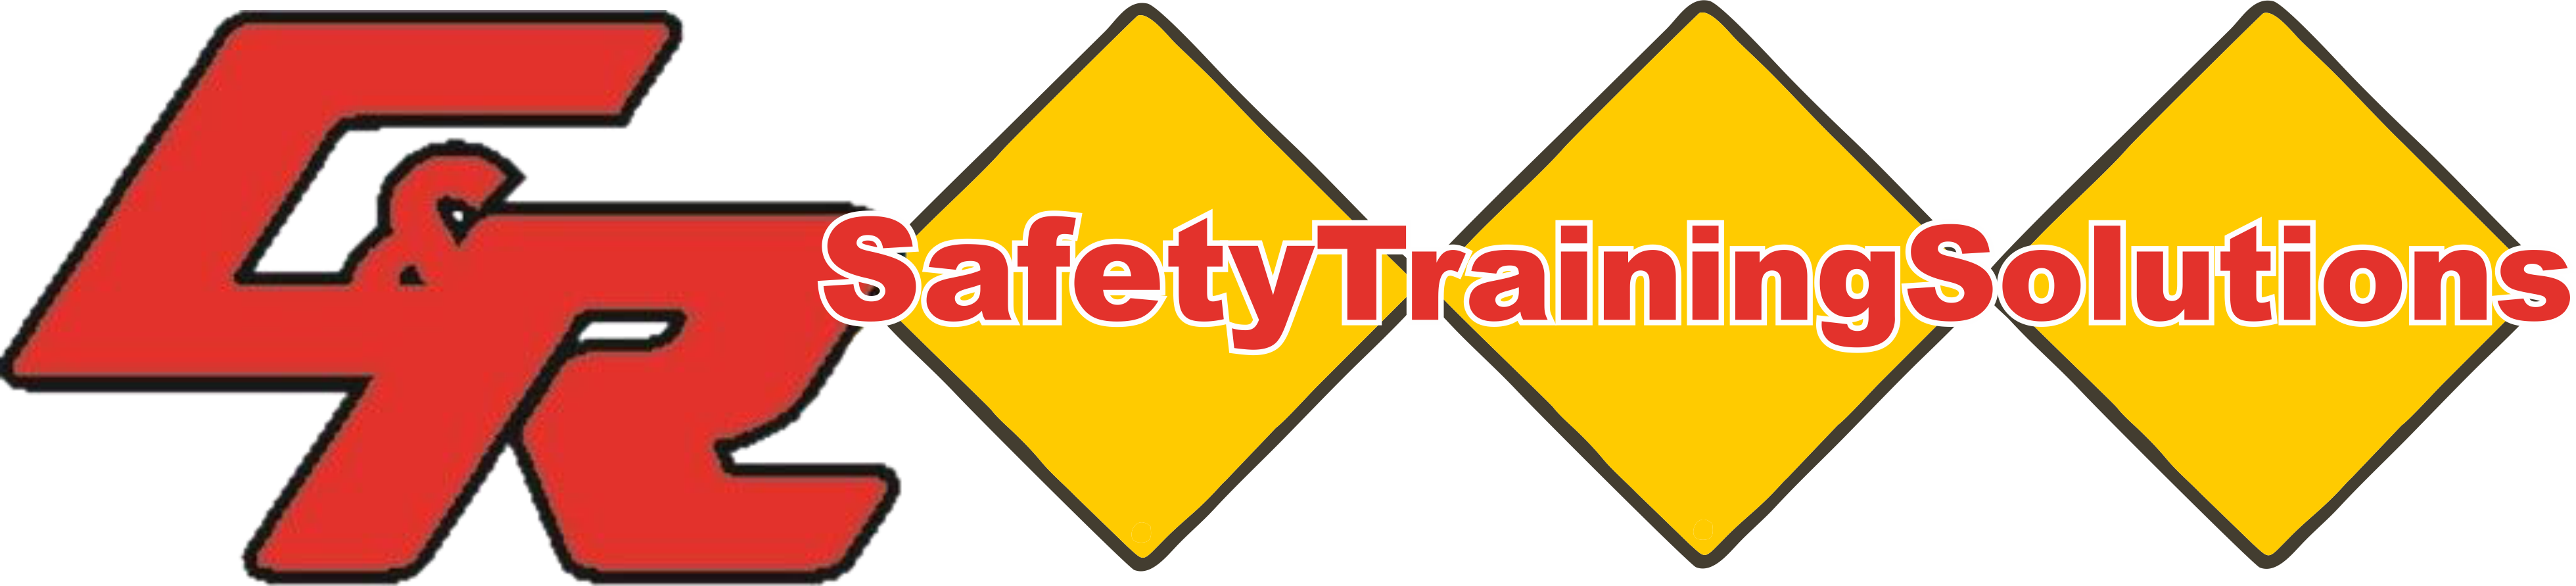 C&R Safety Training Solutions Logo